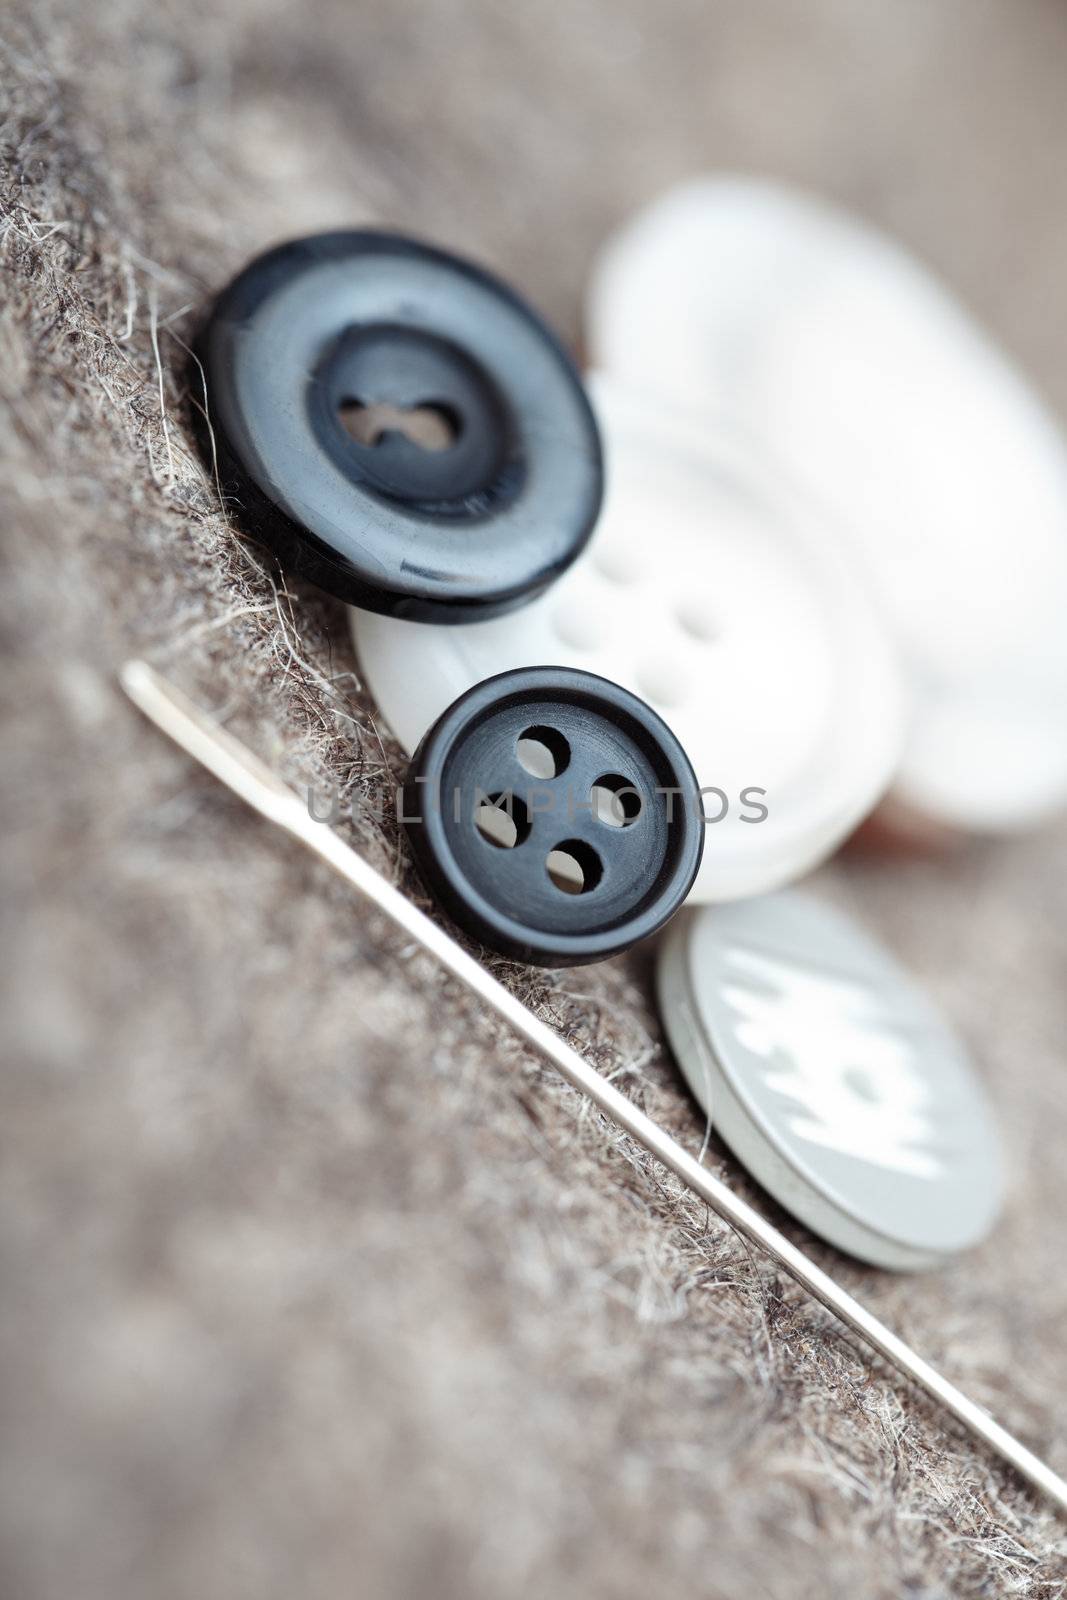 Buttons and sewing needle. Extremely close-up photo with shallow depth of field